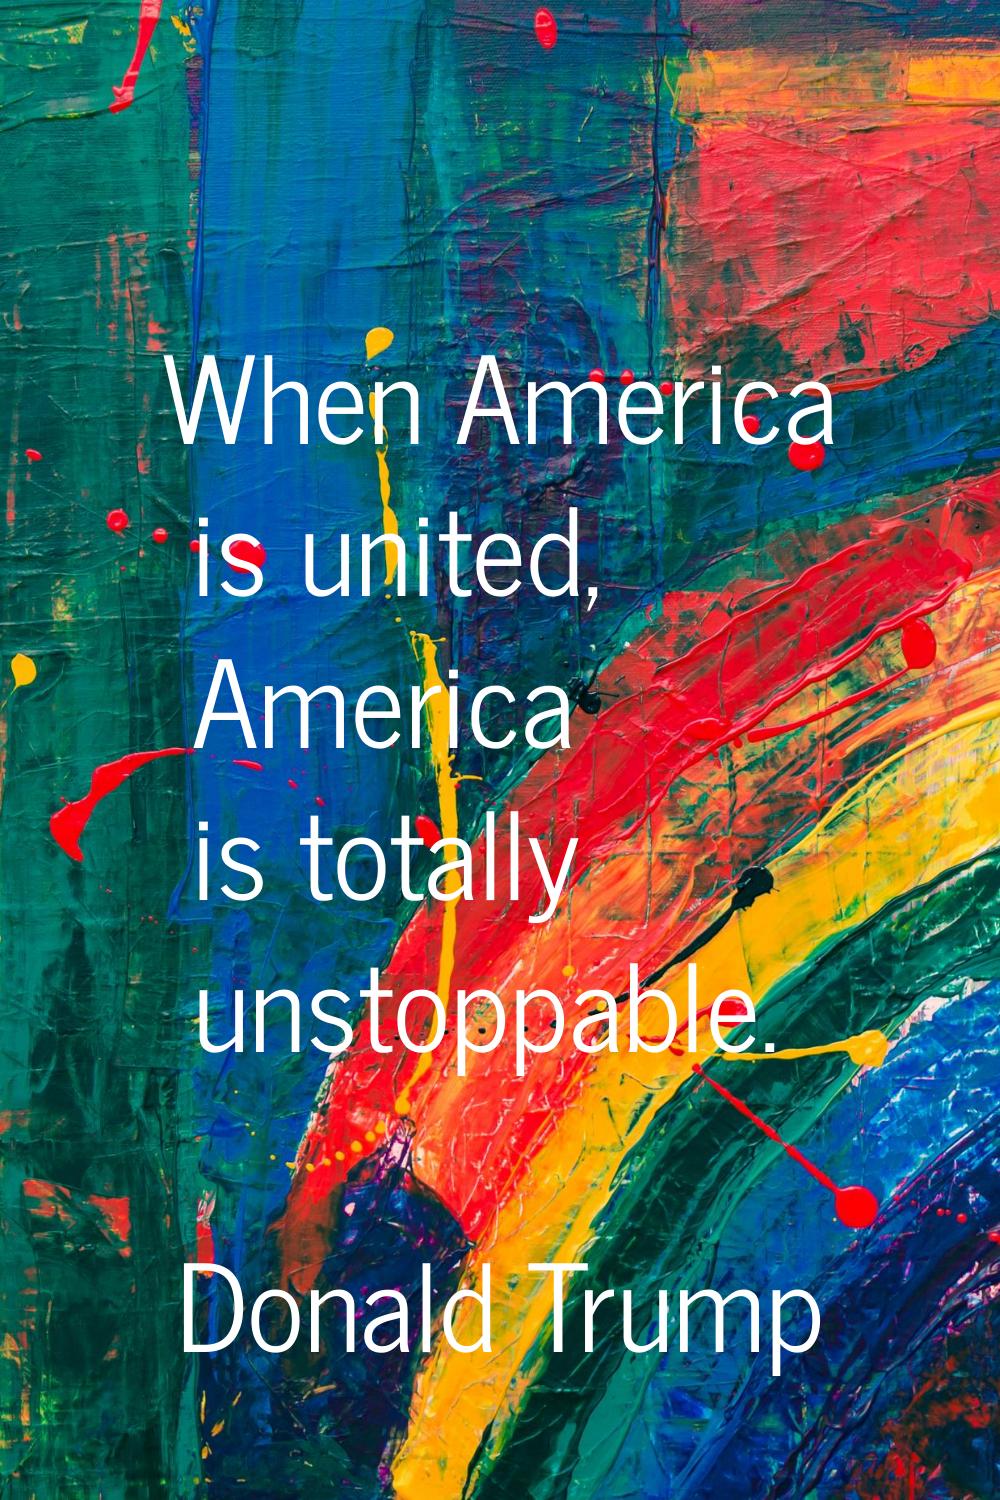 When America is united, America is totally unstoppable.